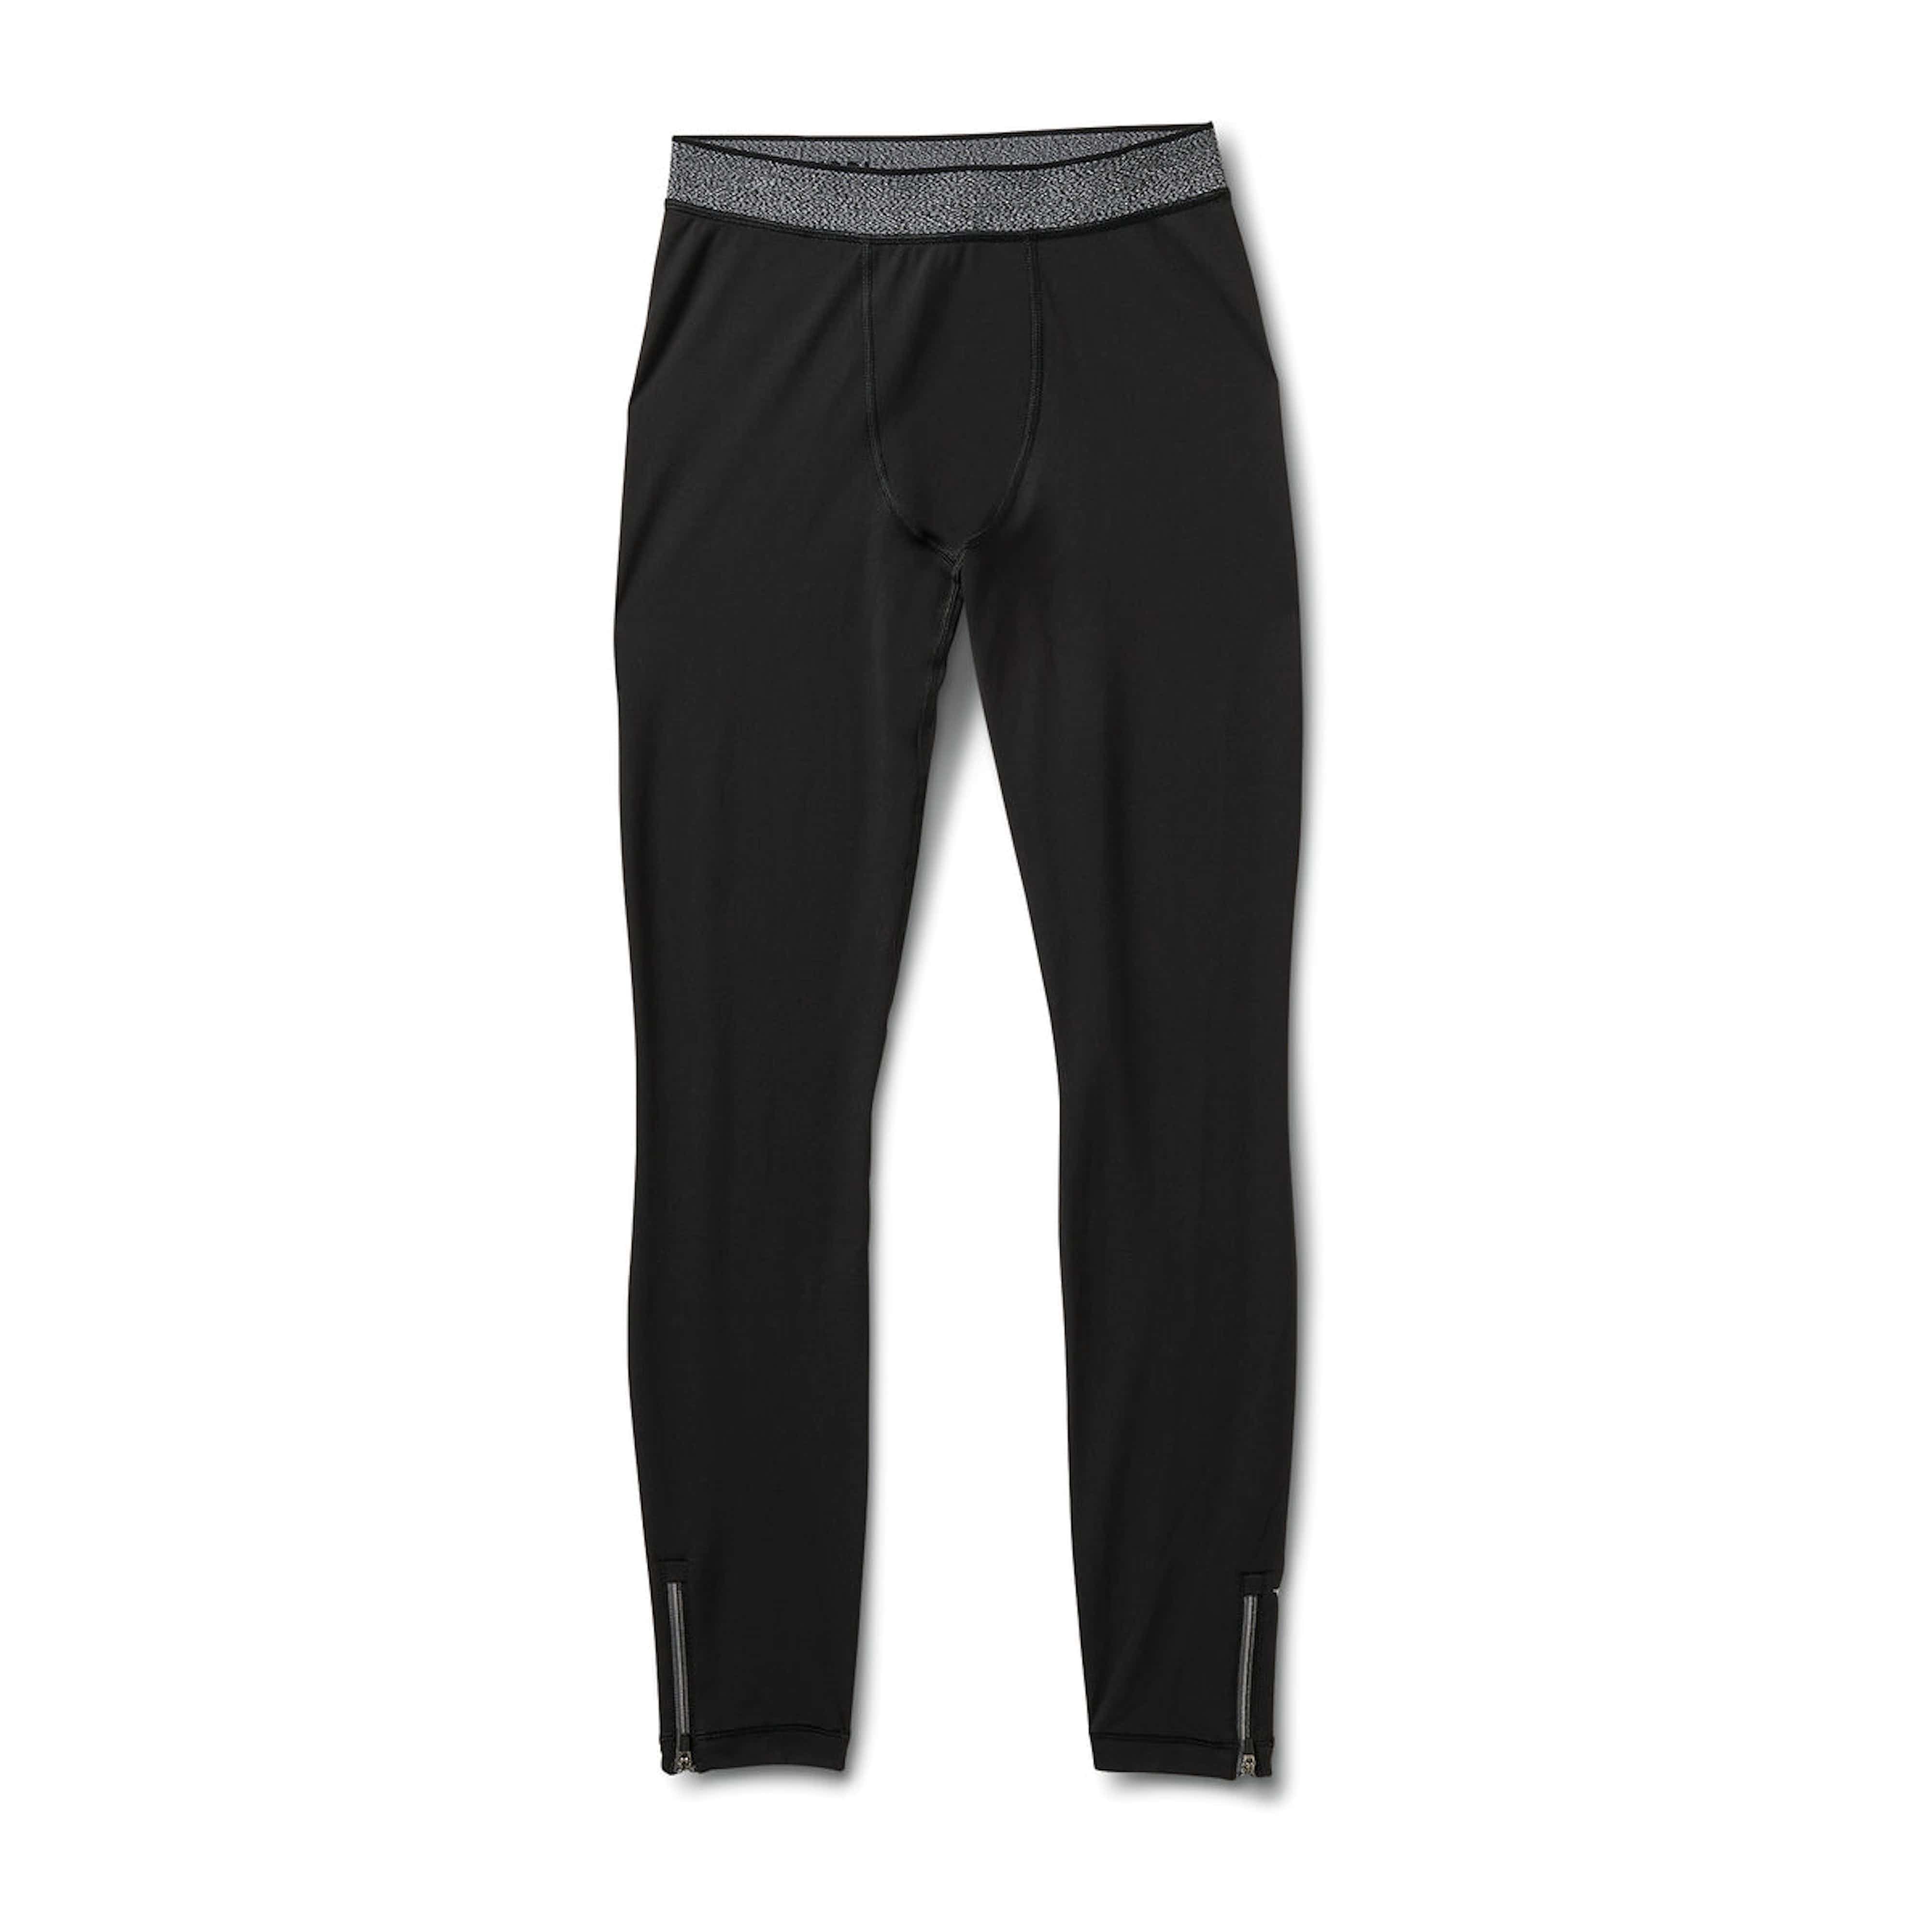 The 15 Best Pairs of Compression Pants for Men in 2023, According to ...